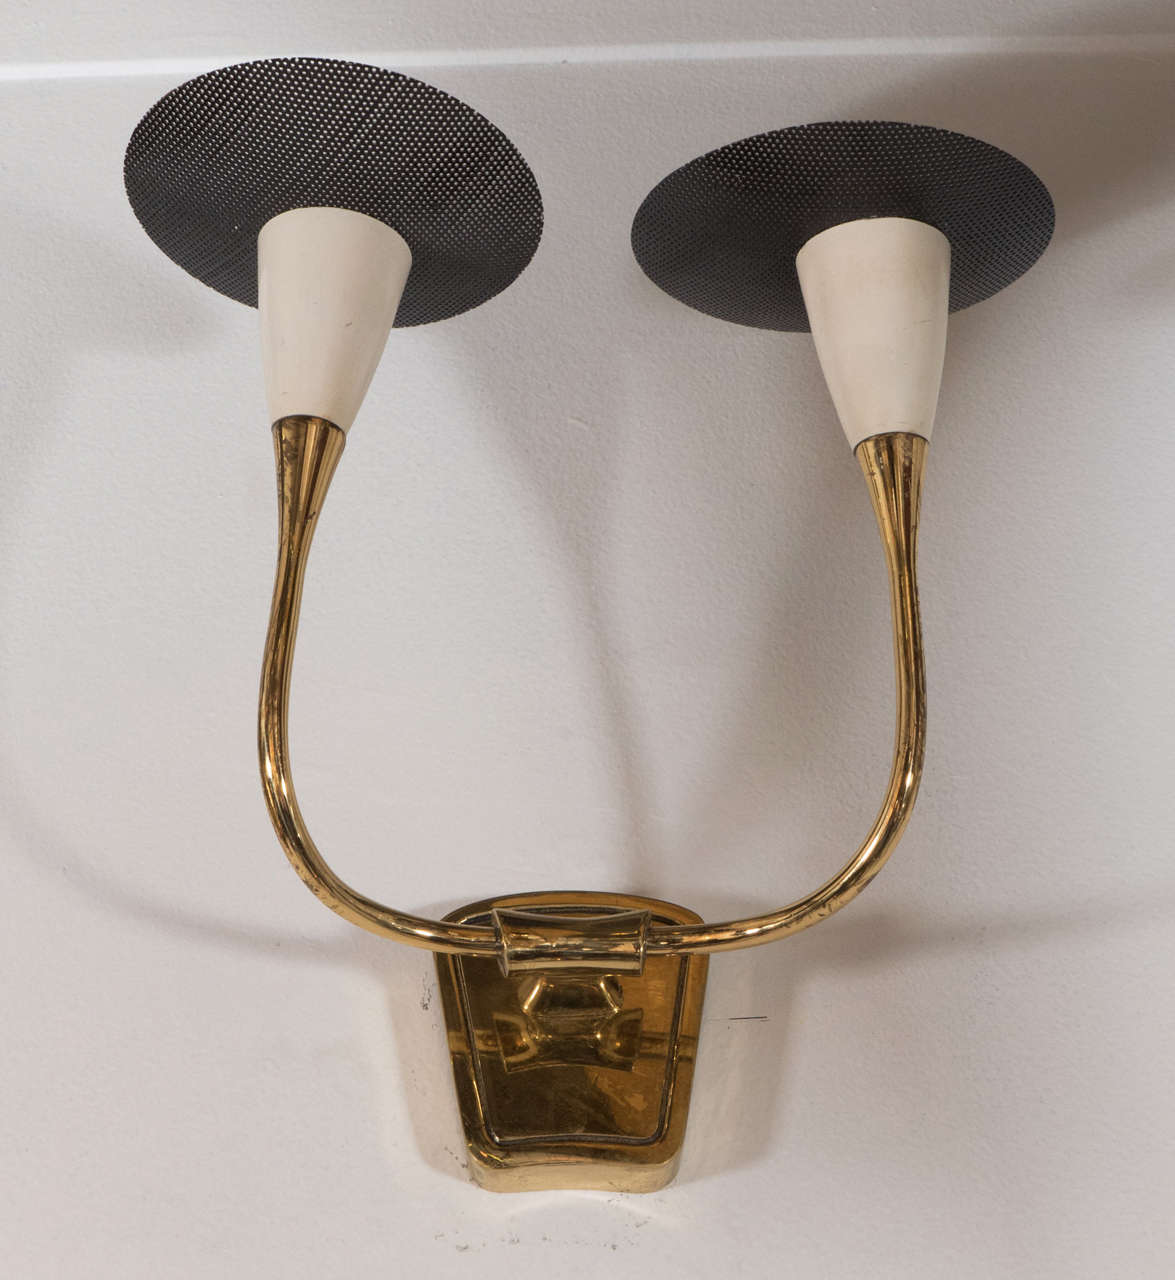 A lovely pair of French 1950s modern design brass two-light sconces. Each with ivory enamel socket covers and asymmetrical pierced metal black enamel bobeches. Brash polished and lacquered. Newly wired. Each sconce measures 11